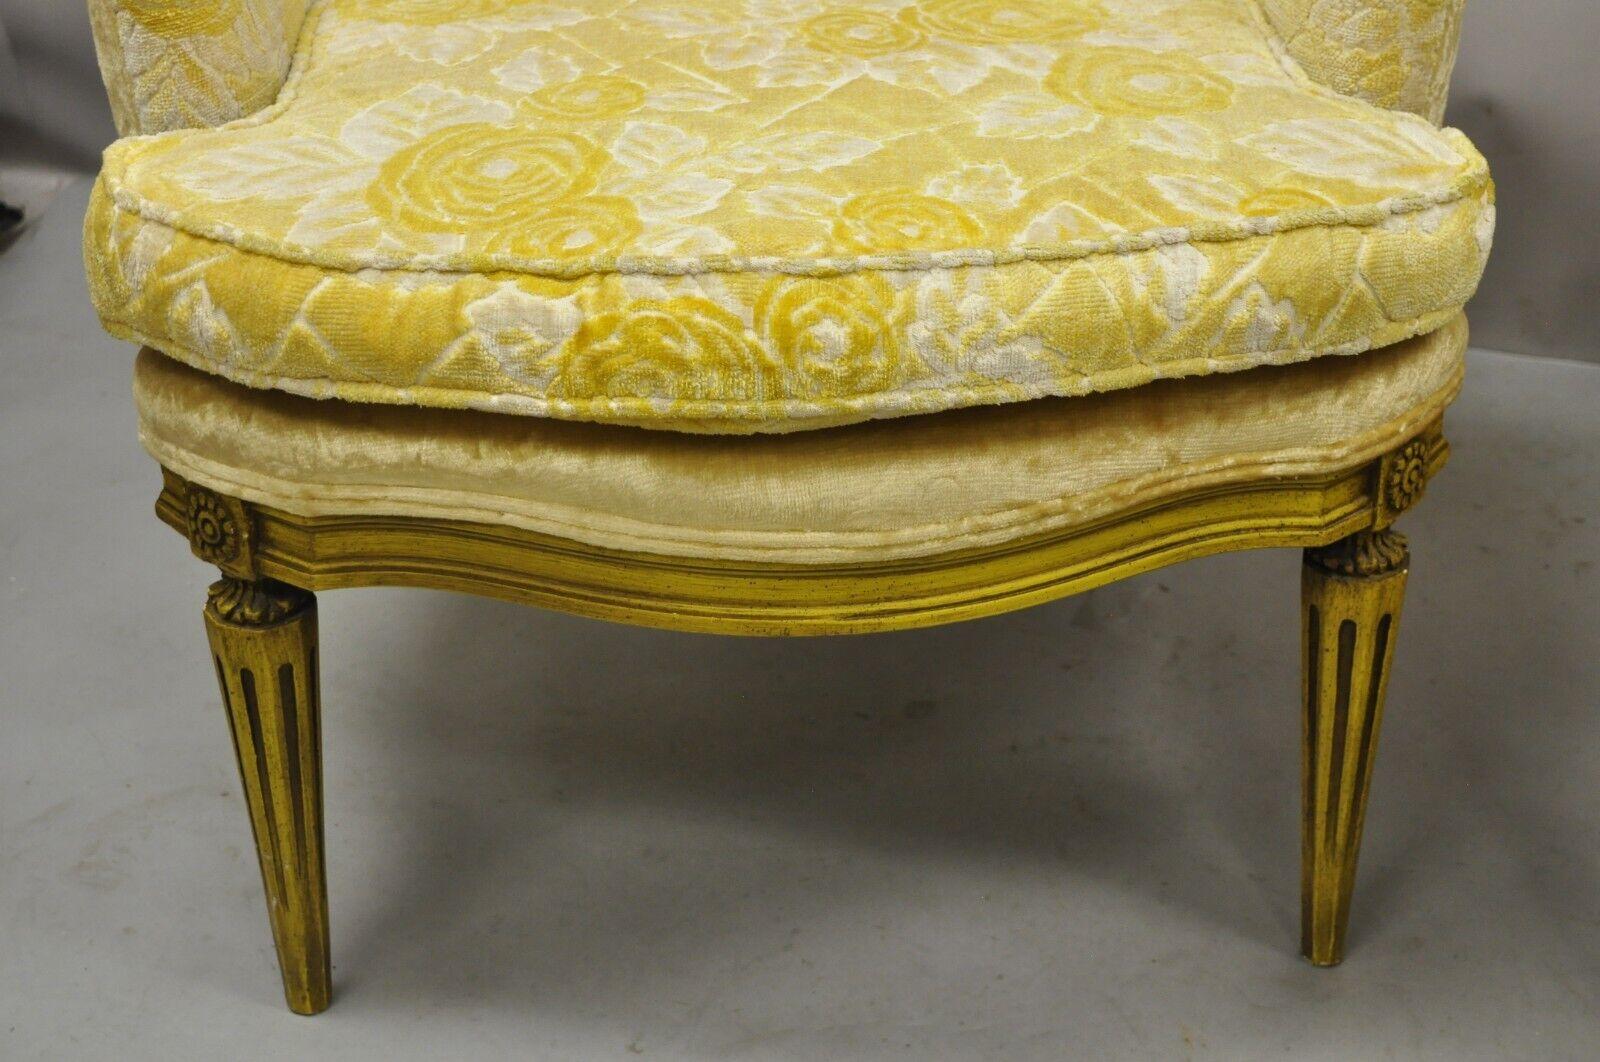 Vintage French Hollywood Regency Yellow Fireside Lounge Chairs - a Pair For Sale 3